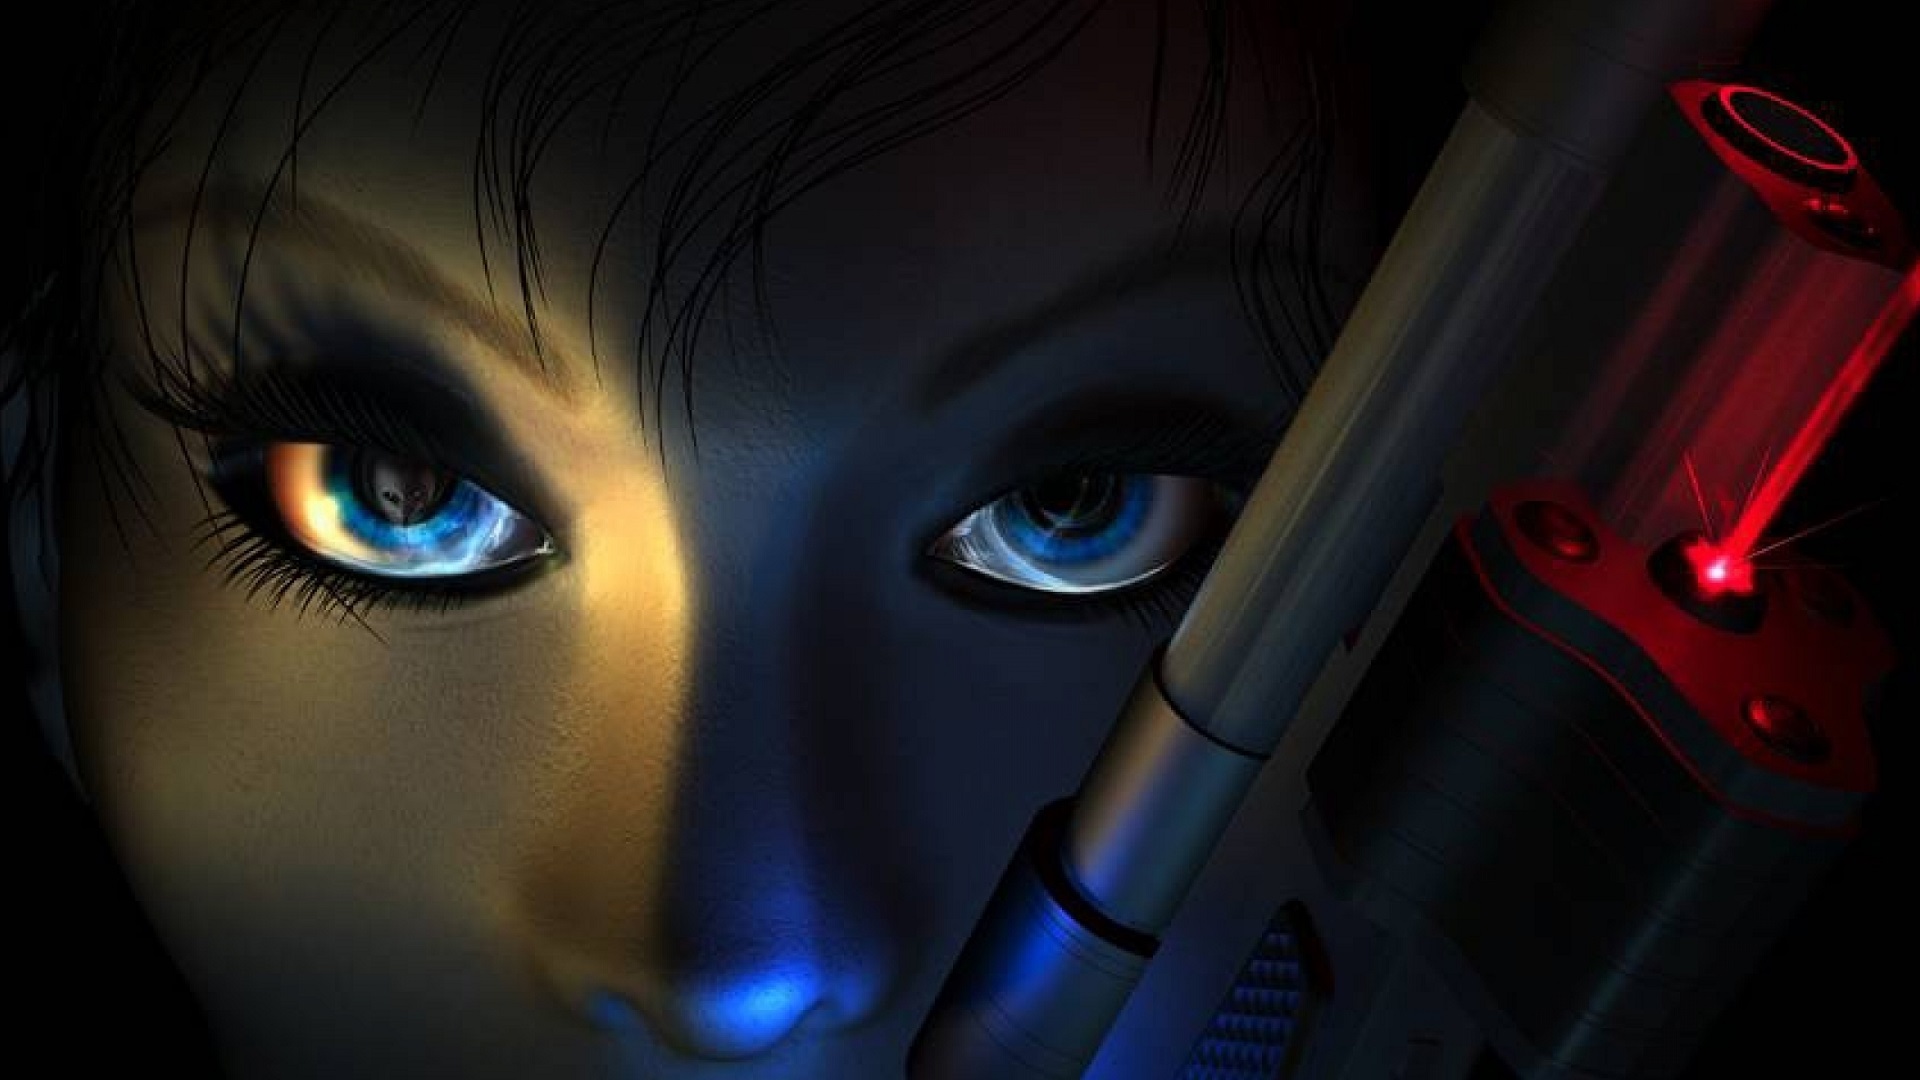 Perfect Dark finally gets the full-featured PC port it deserves